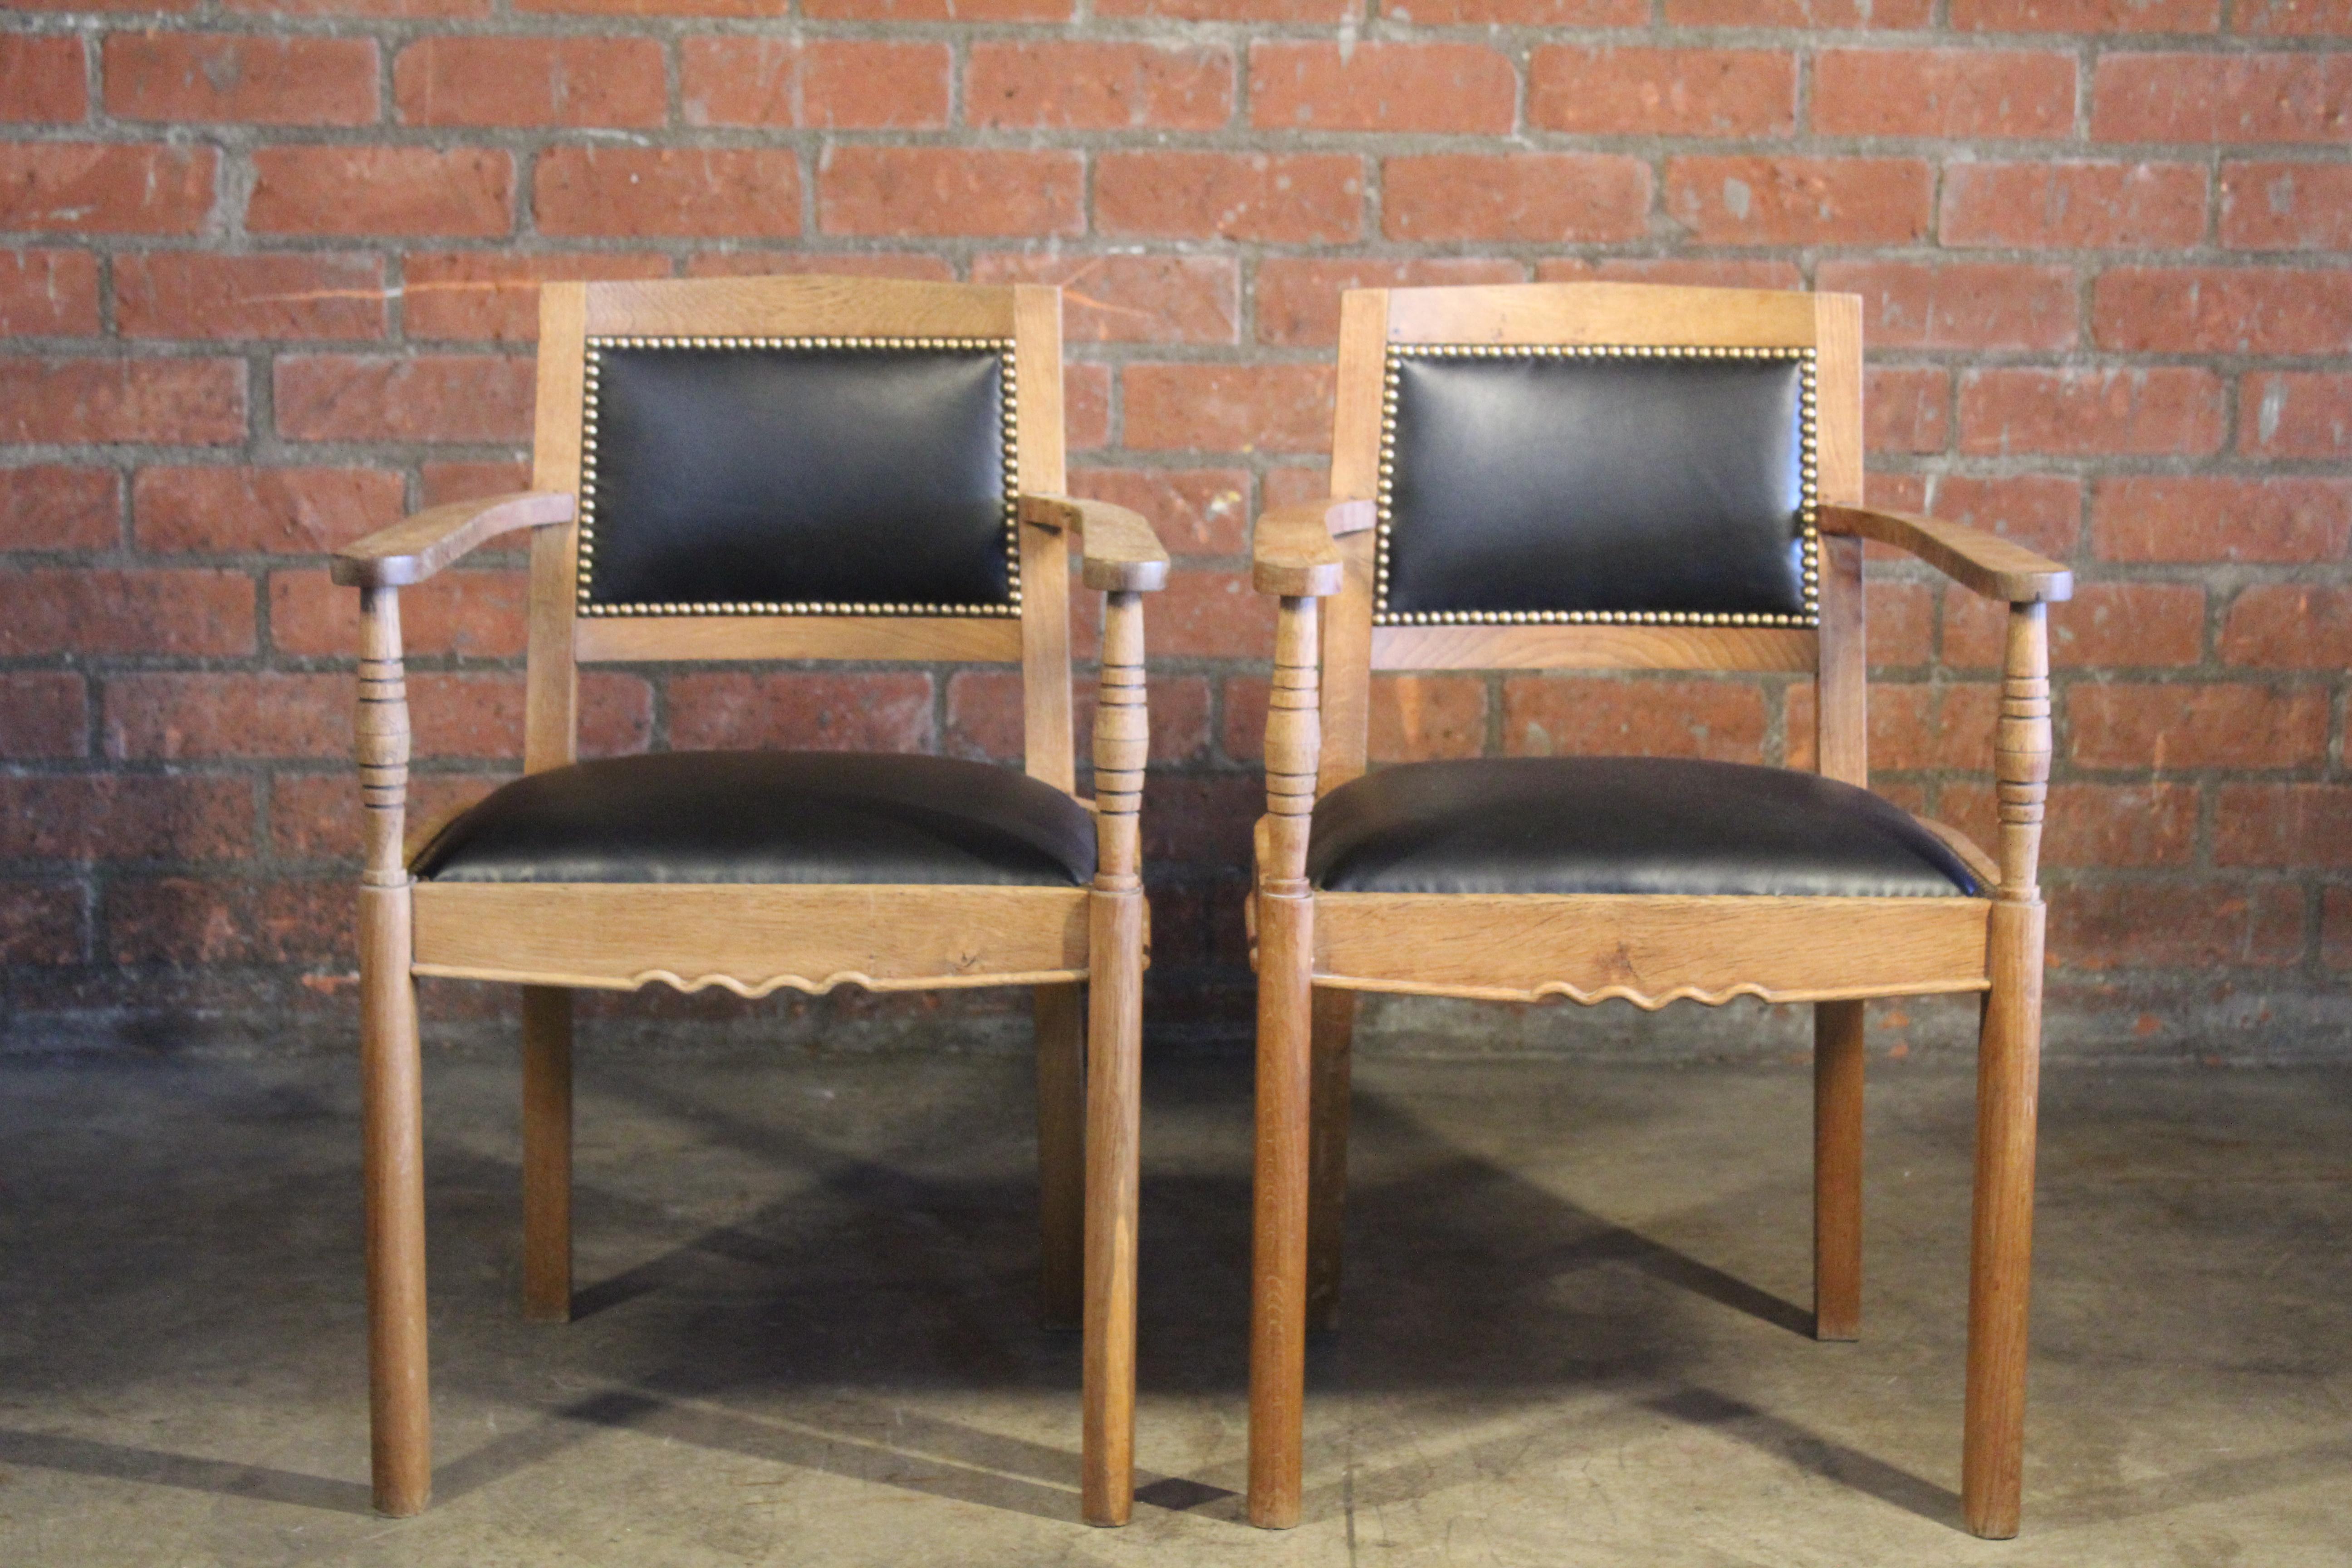 Pair of oak armchairs attributed to Charles Dudoyt. Newly upholstered in black leather with brass nailheads.